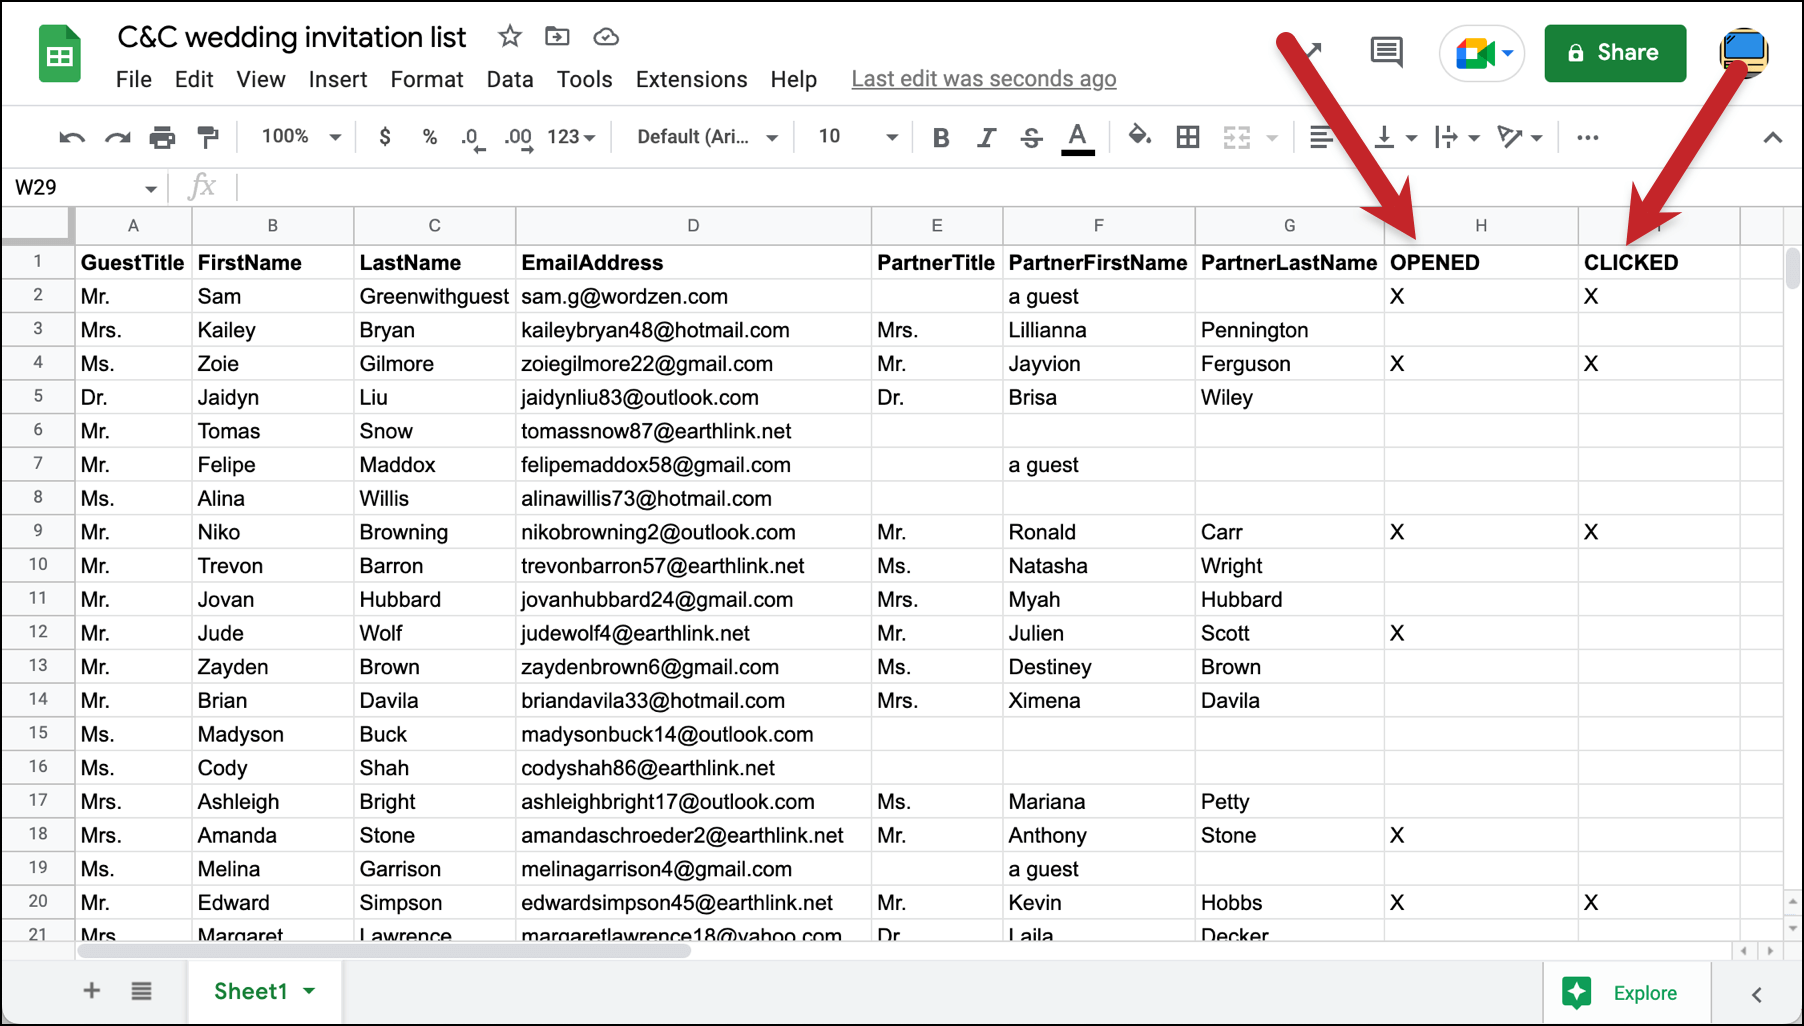 Reporting in the Google Sheet